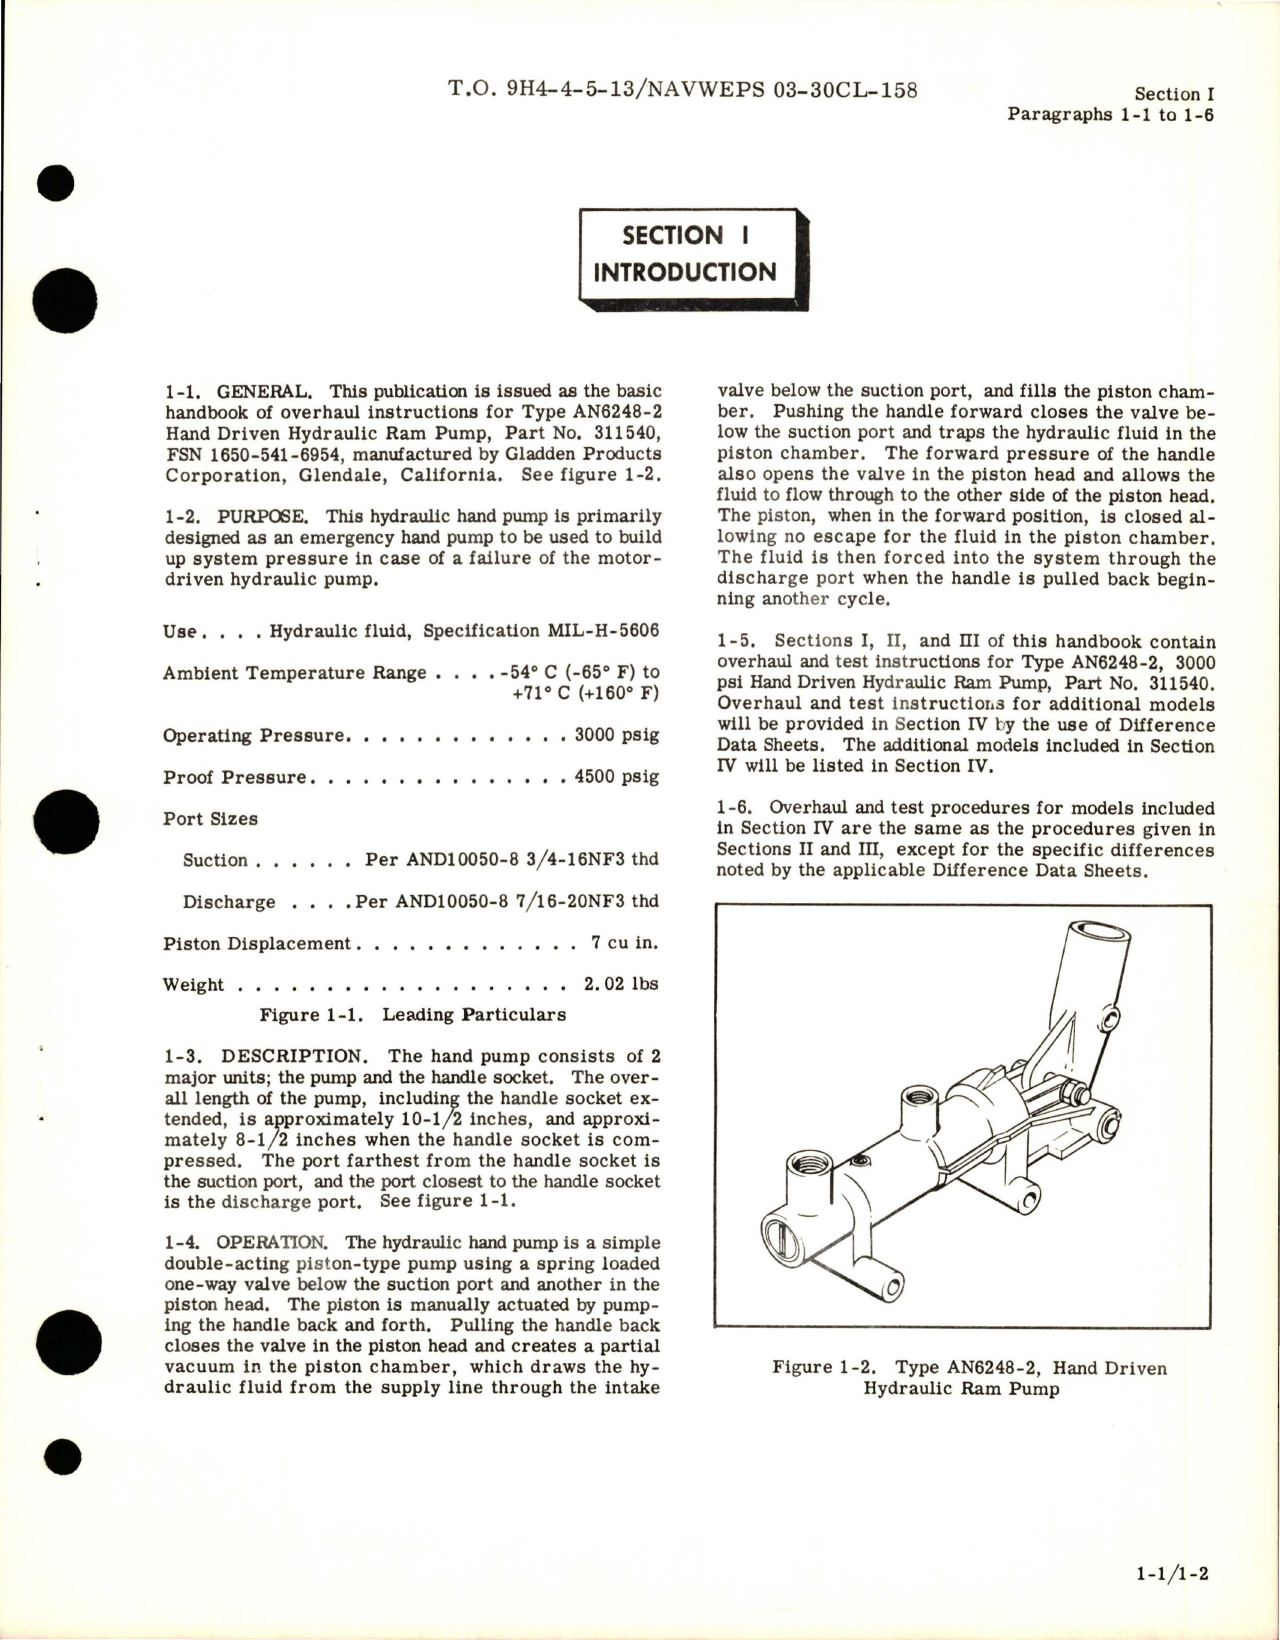 Sample page 5 from AirCorps Library document: Overhaul Manual for Hand Driven Hydraulic Hand Pump - Type AN6248-2 - Part 311540